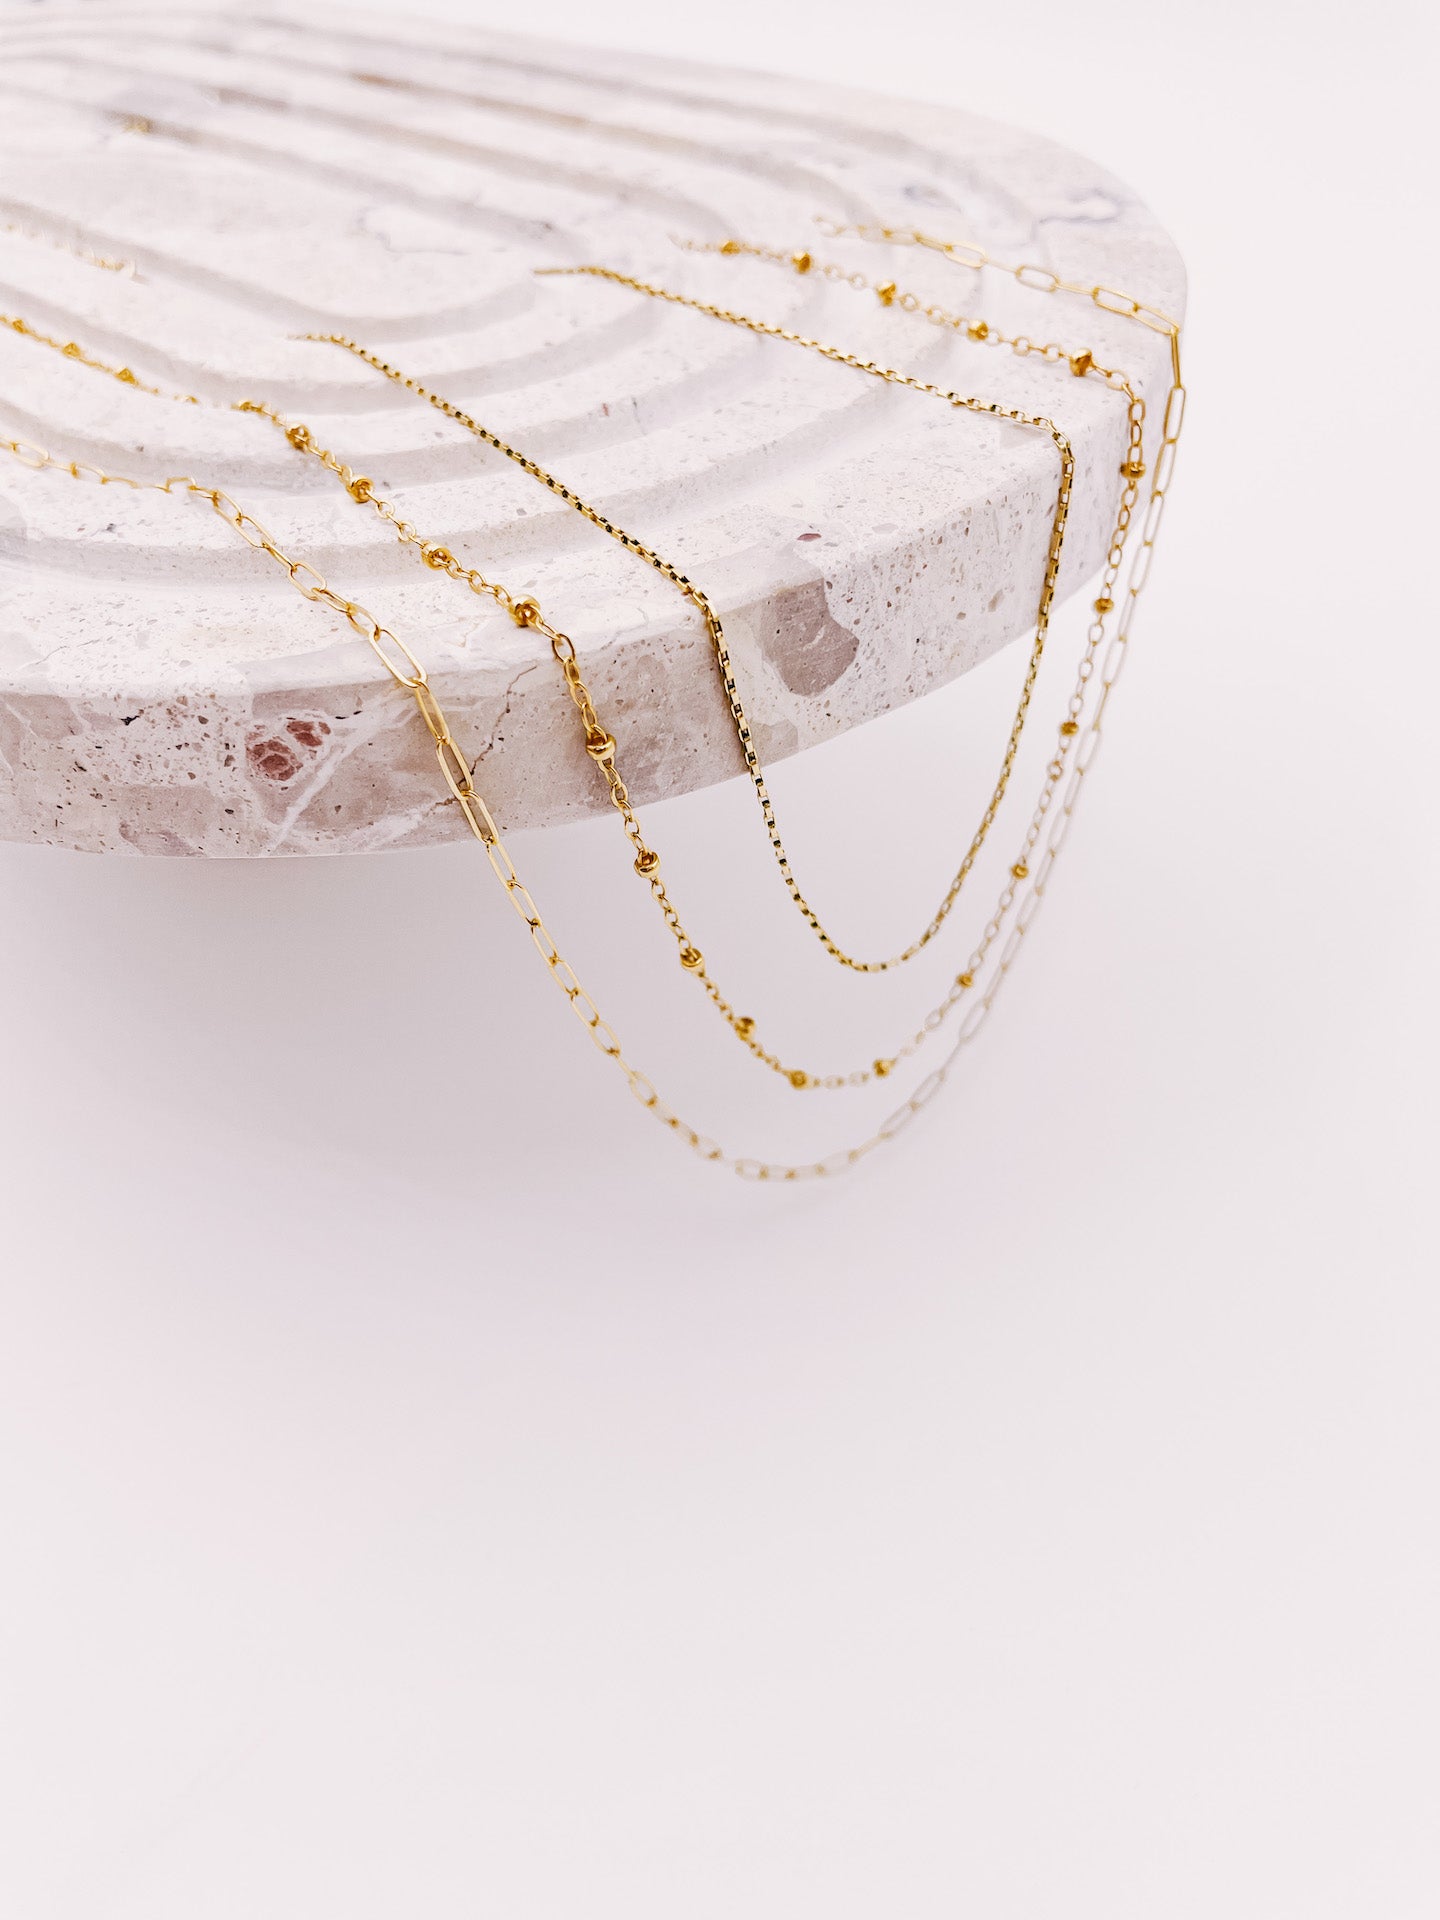 3 layering chains draped hanging off end of tray from AW Boutique gold filled jewellery.